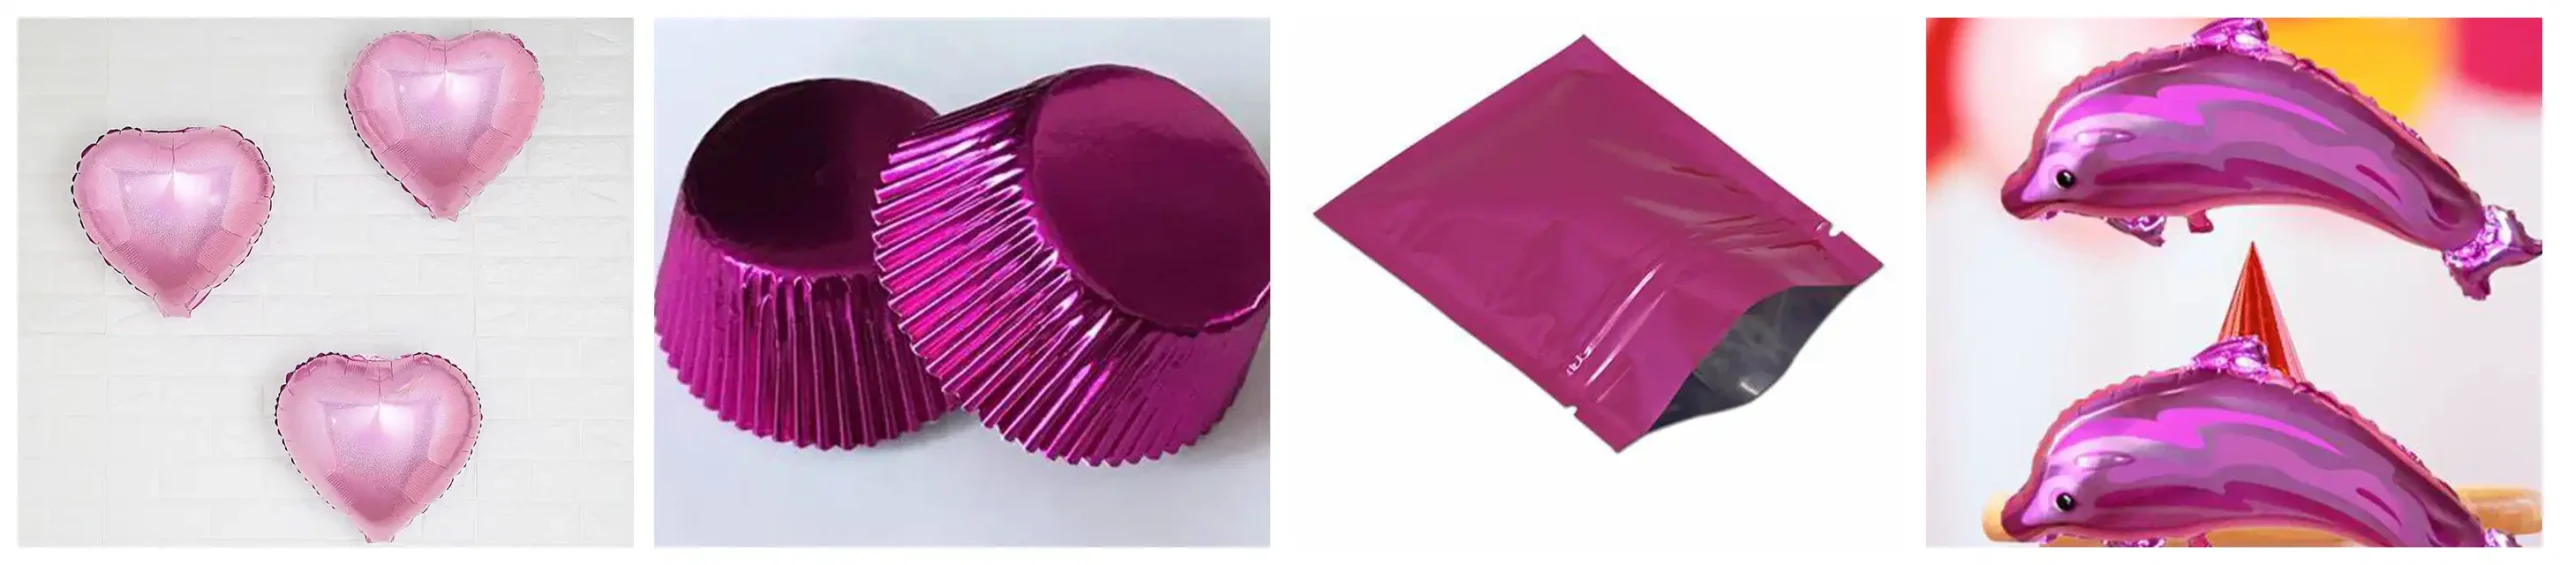 pink aluminum foil for chocolates and candies packaging, decorative